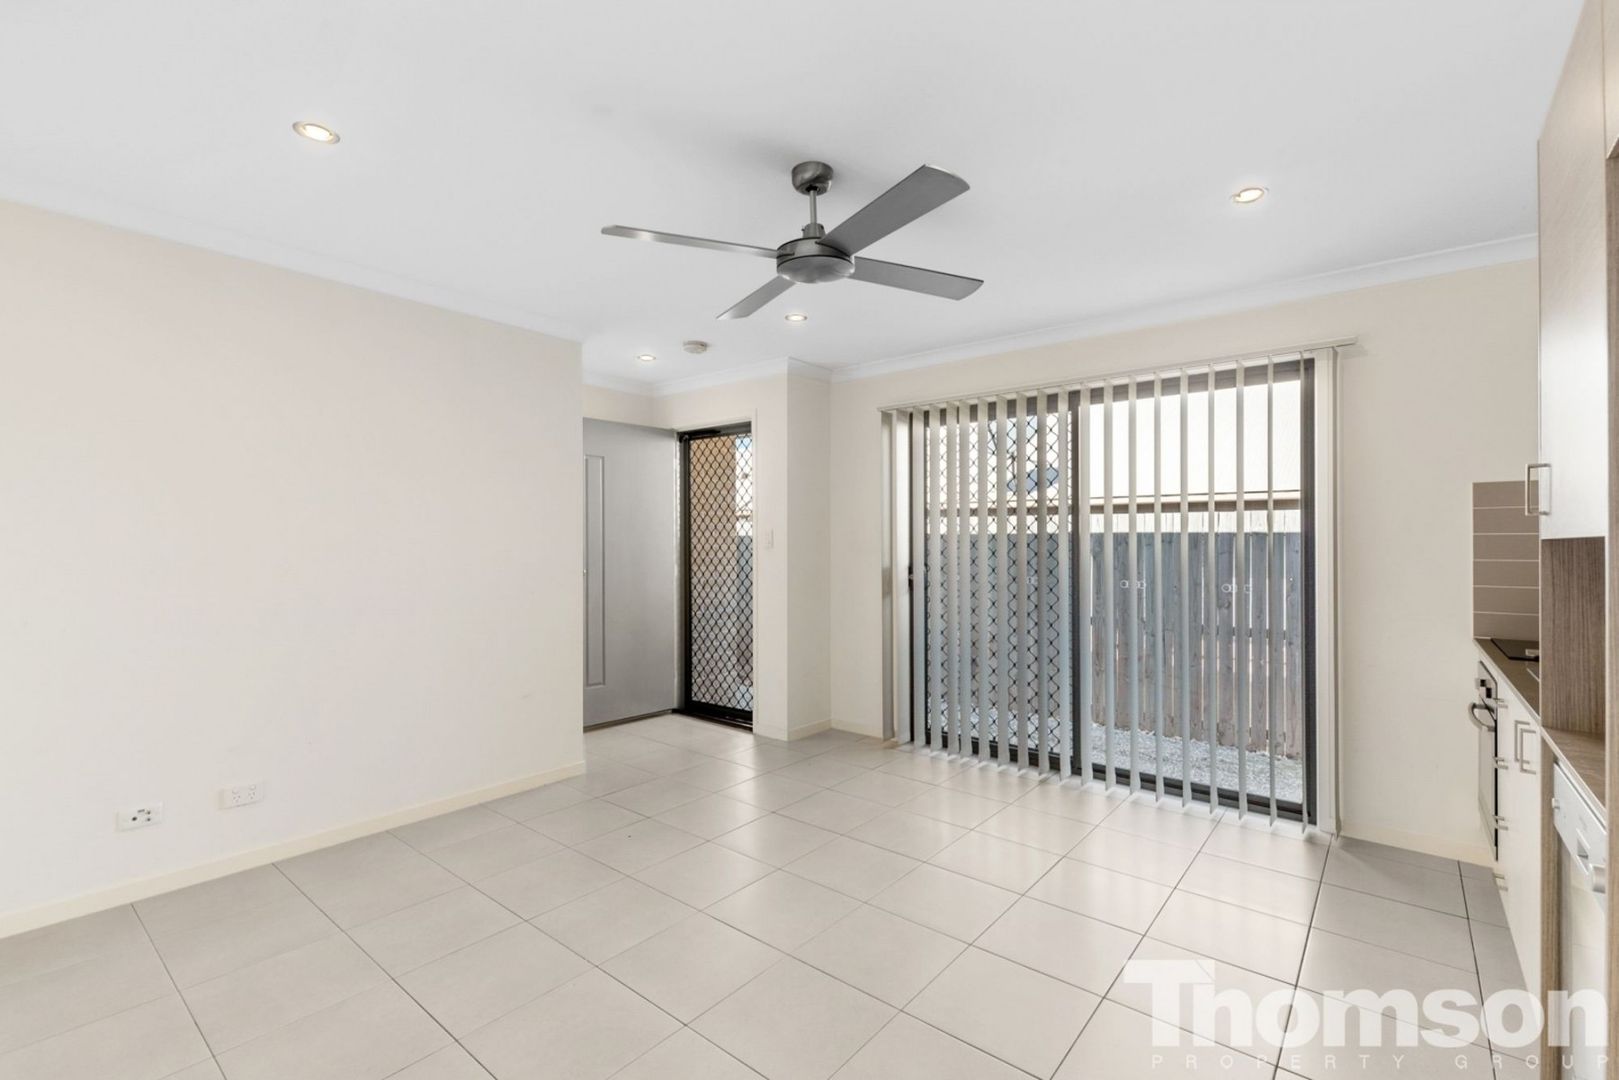 2/10 Boreas Street, Griffin QLD 4503, Image 2